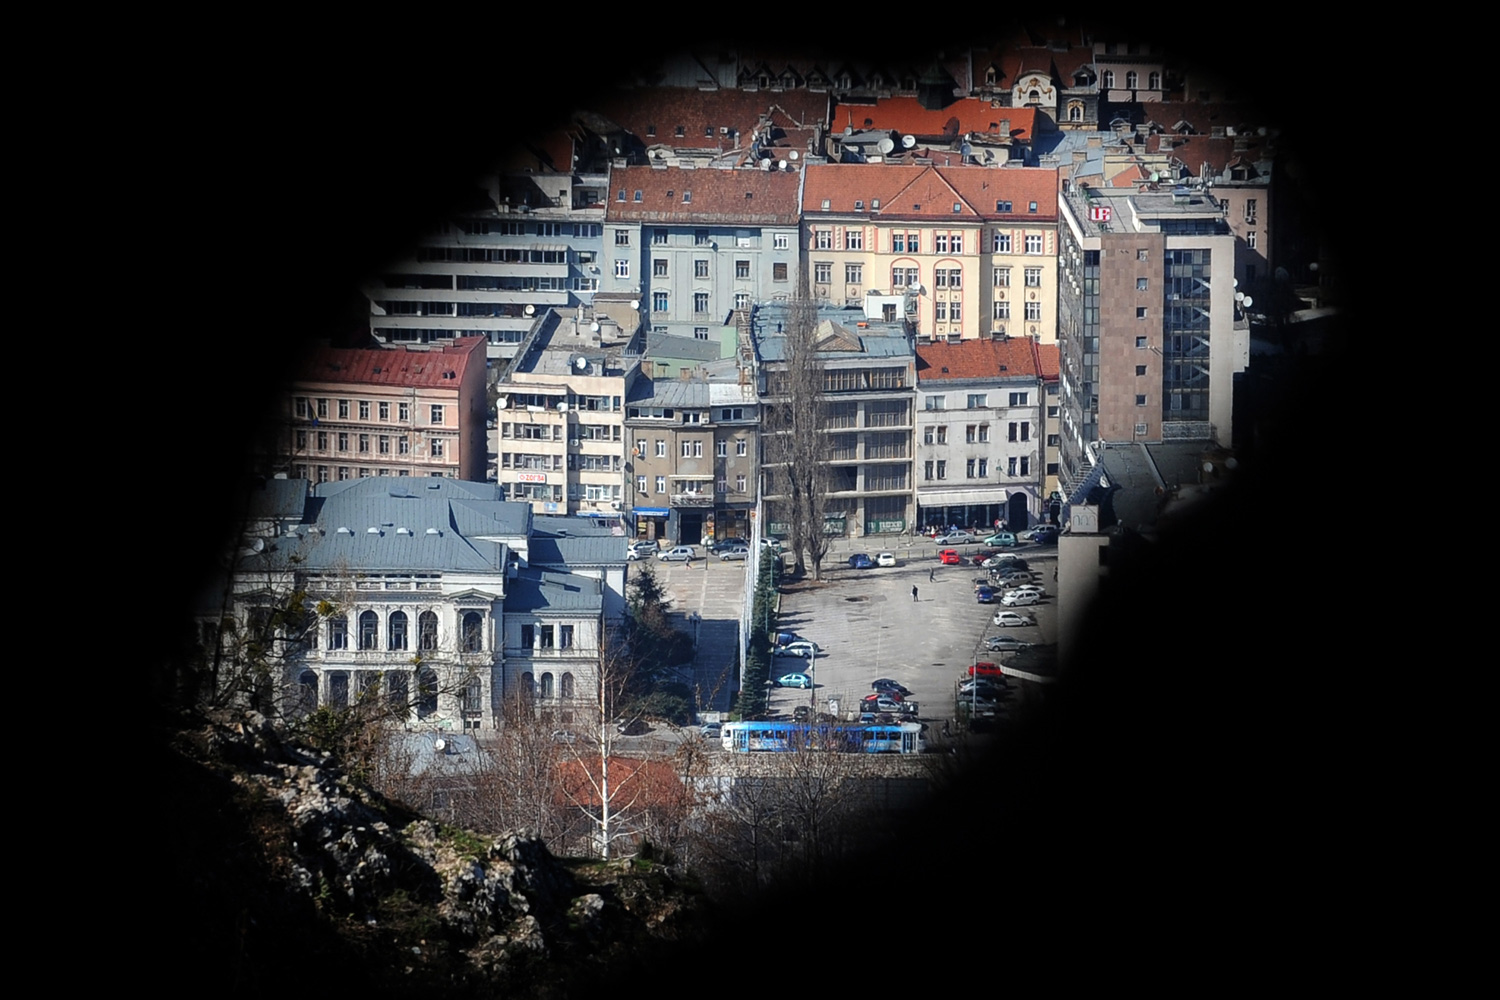 April 2, 2012. A former sniper position on the slopes of mount Trebevic gives a view of Bosnian capital Sarajevo.